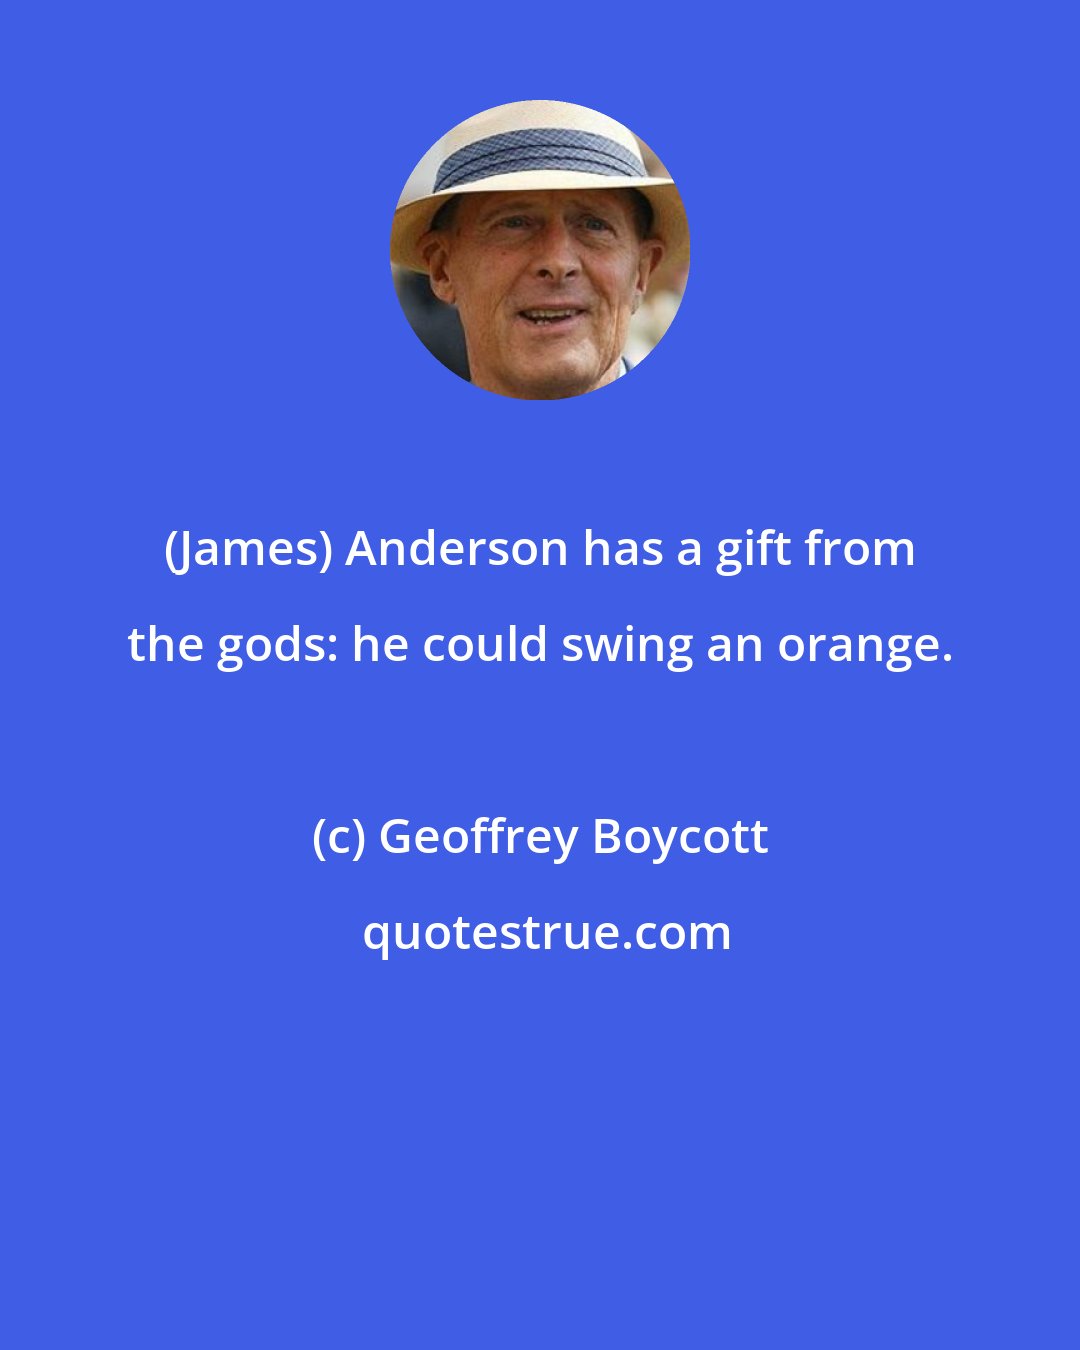 Geoffrey Boycott: (James) Anderson has a gift from the gods: he could swing an orange.